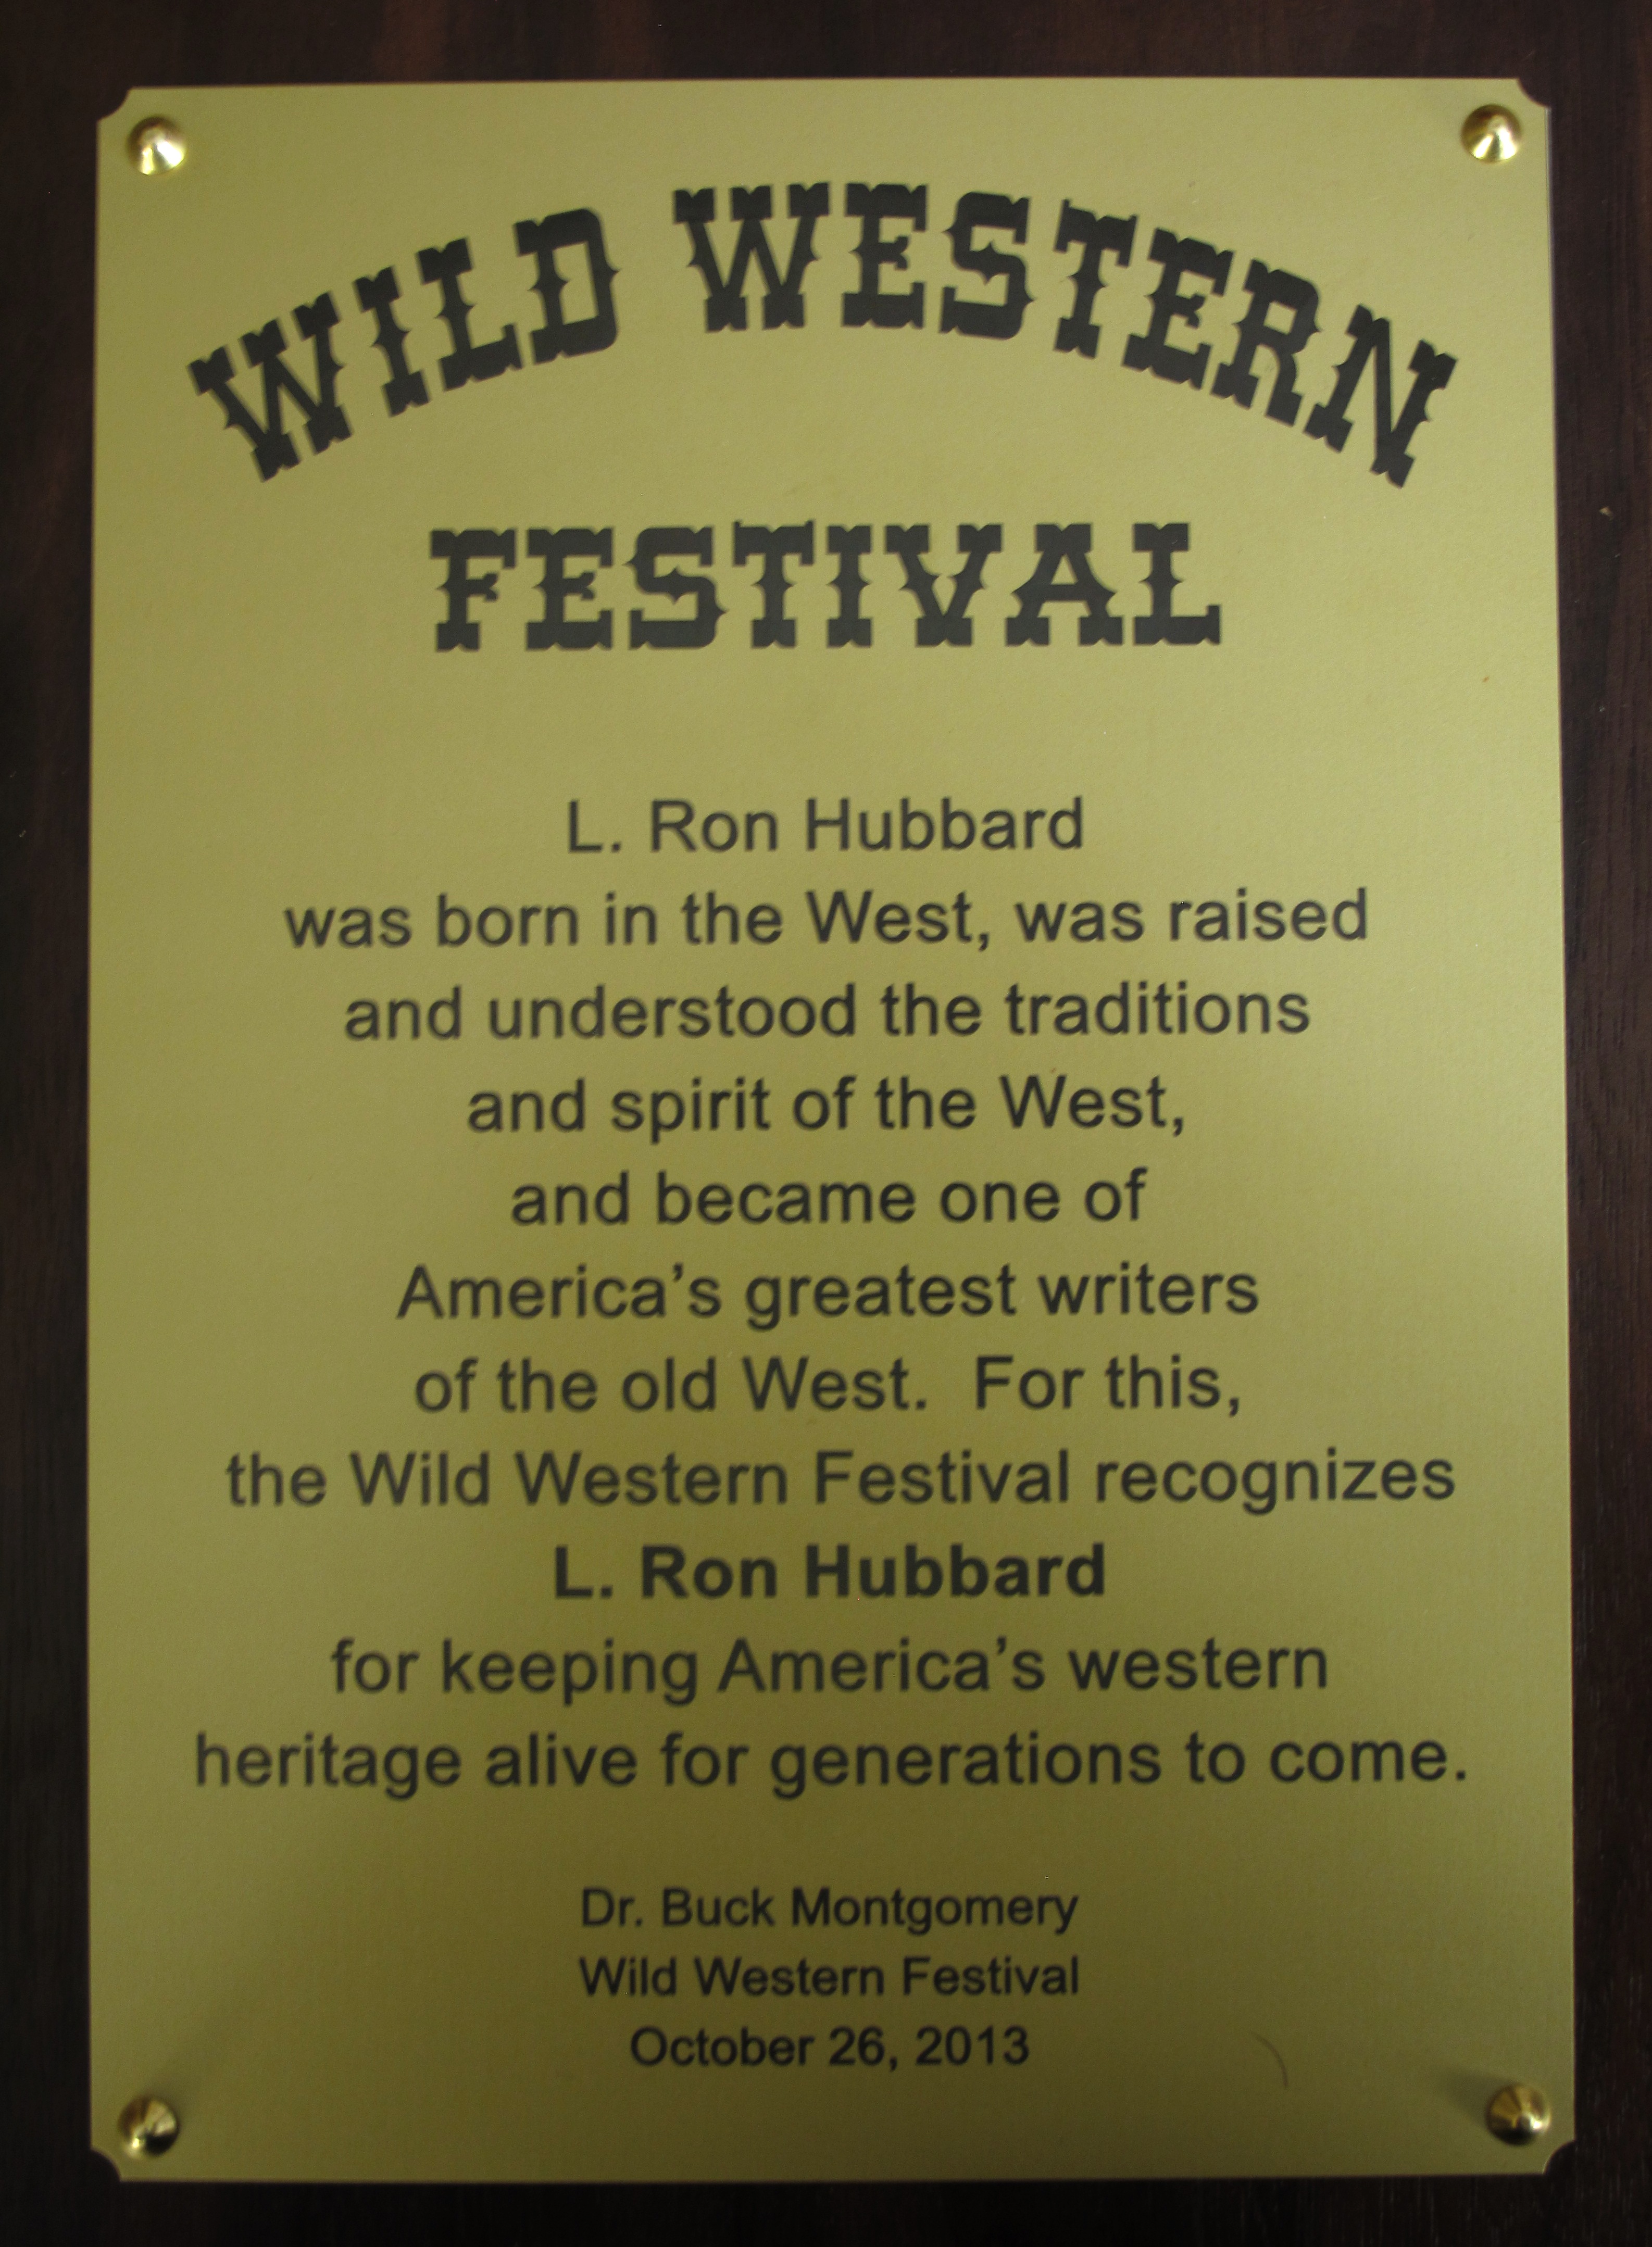 The Wild Western Festival recognizes L. Ron Hubbard for keeping America's western heritage alive for generations to come.